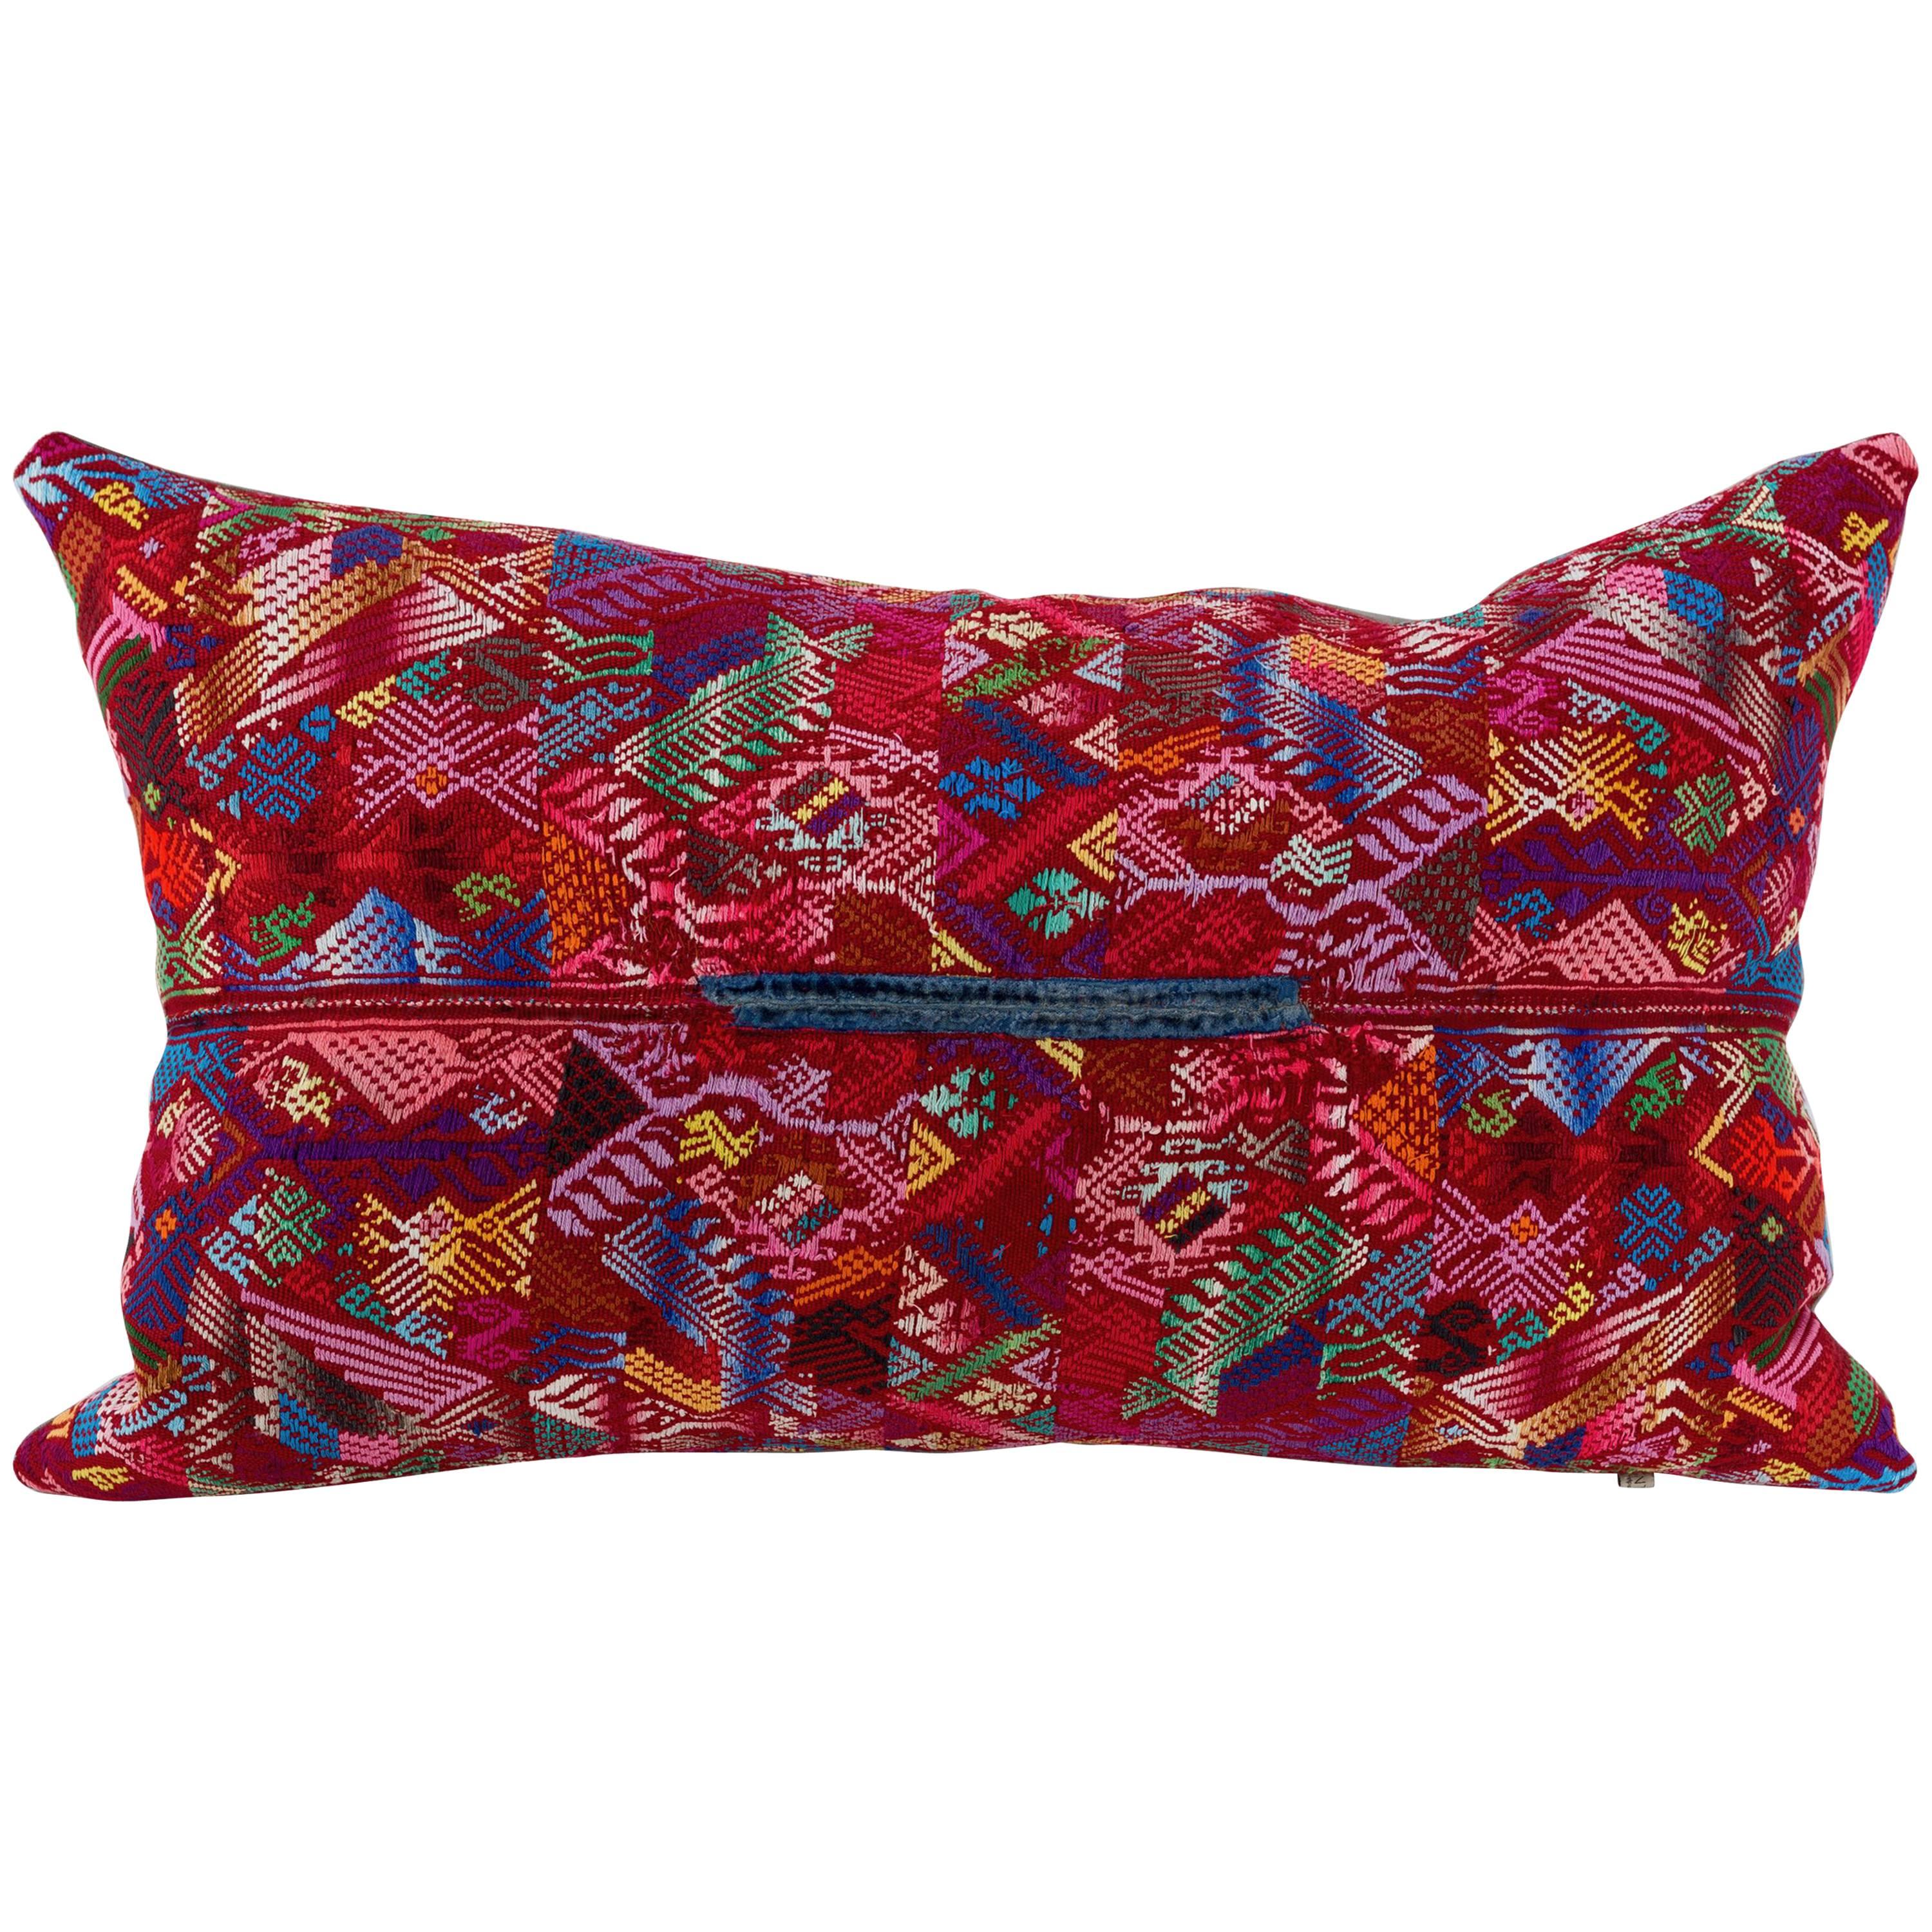 Guatemalan Huipil Textile Pillow in Red Pink Violet Blue Yellow For Sale